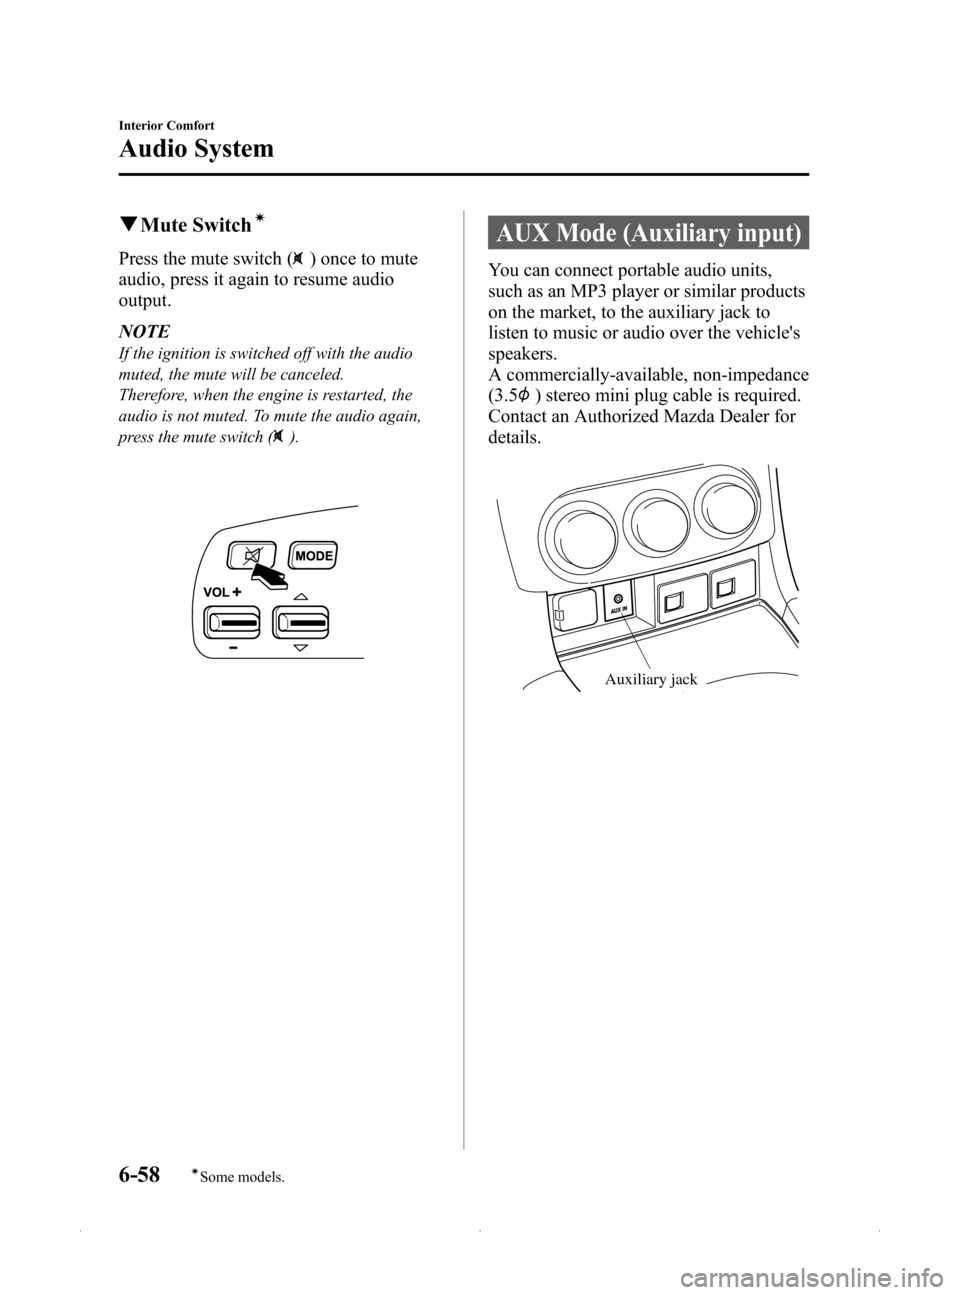 MAZDA MODEL MX-5 2015  Owners Manual (in English) Black plate (270,1)
qMute Switchí
Press the mute switch () once to mute
audio, press it again to resume audio
output.
NOTE
If the ignition is switched off with the audio
muted, the mute will be cance